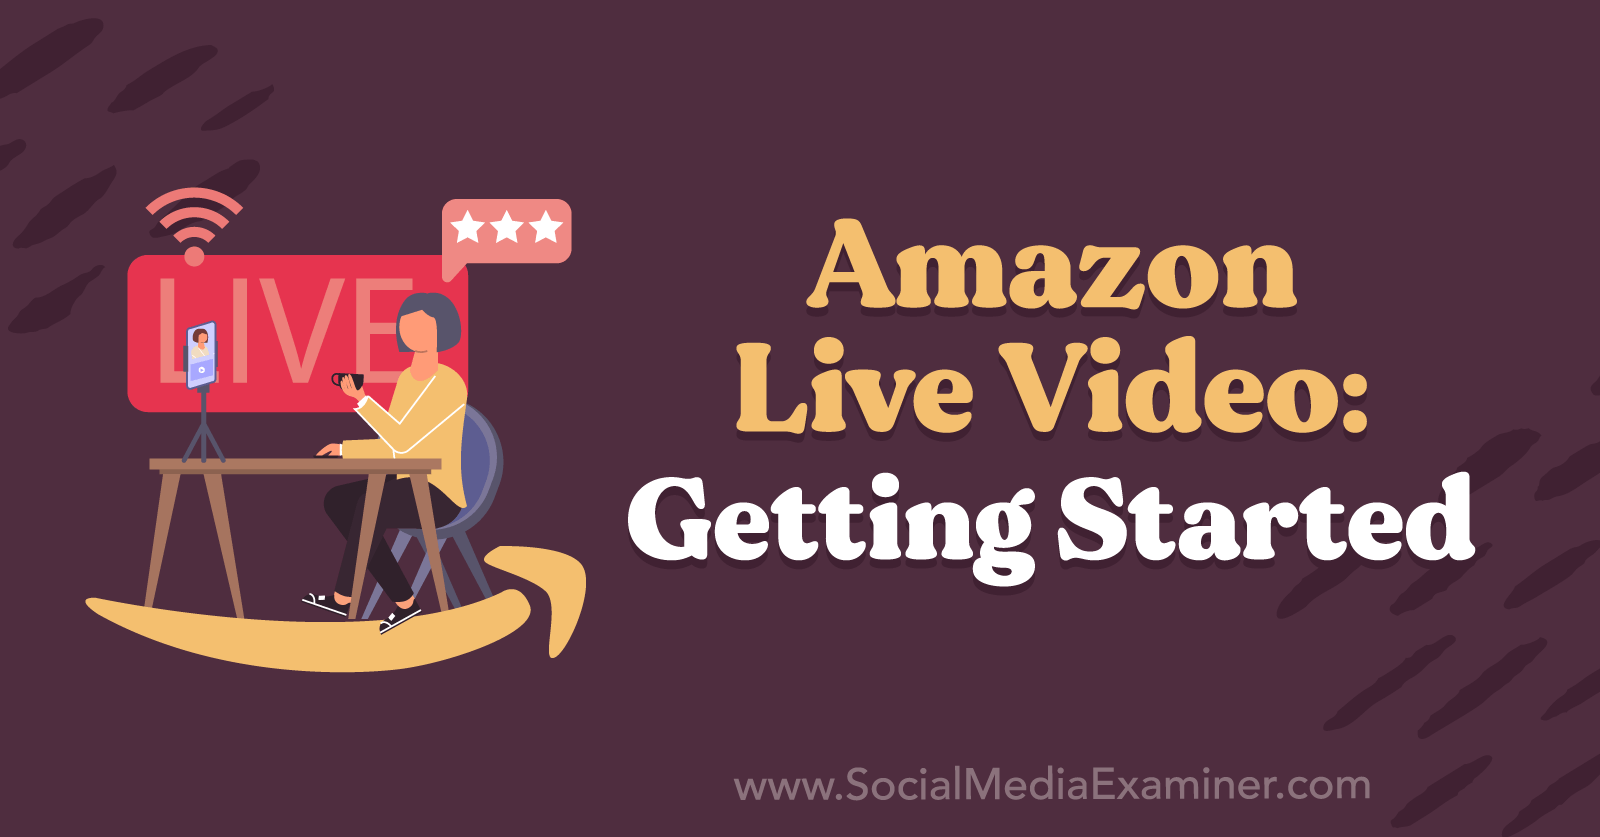 Amazon Live Video: Getting Started featuring insights from Kirk Nugent on the Social Media Marketing Podcast.